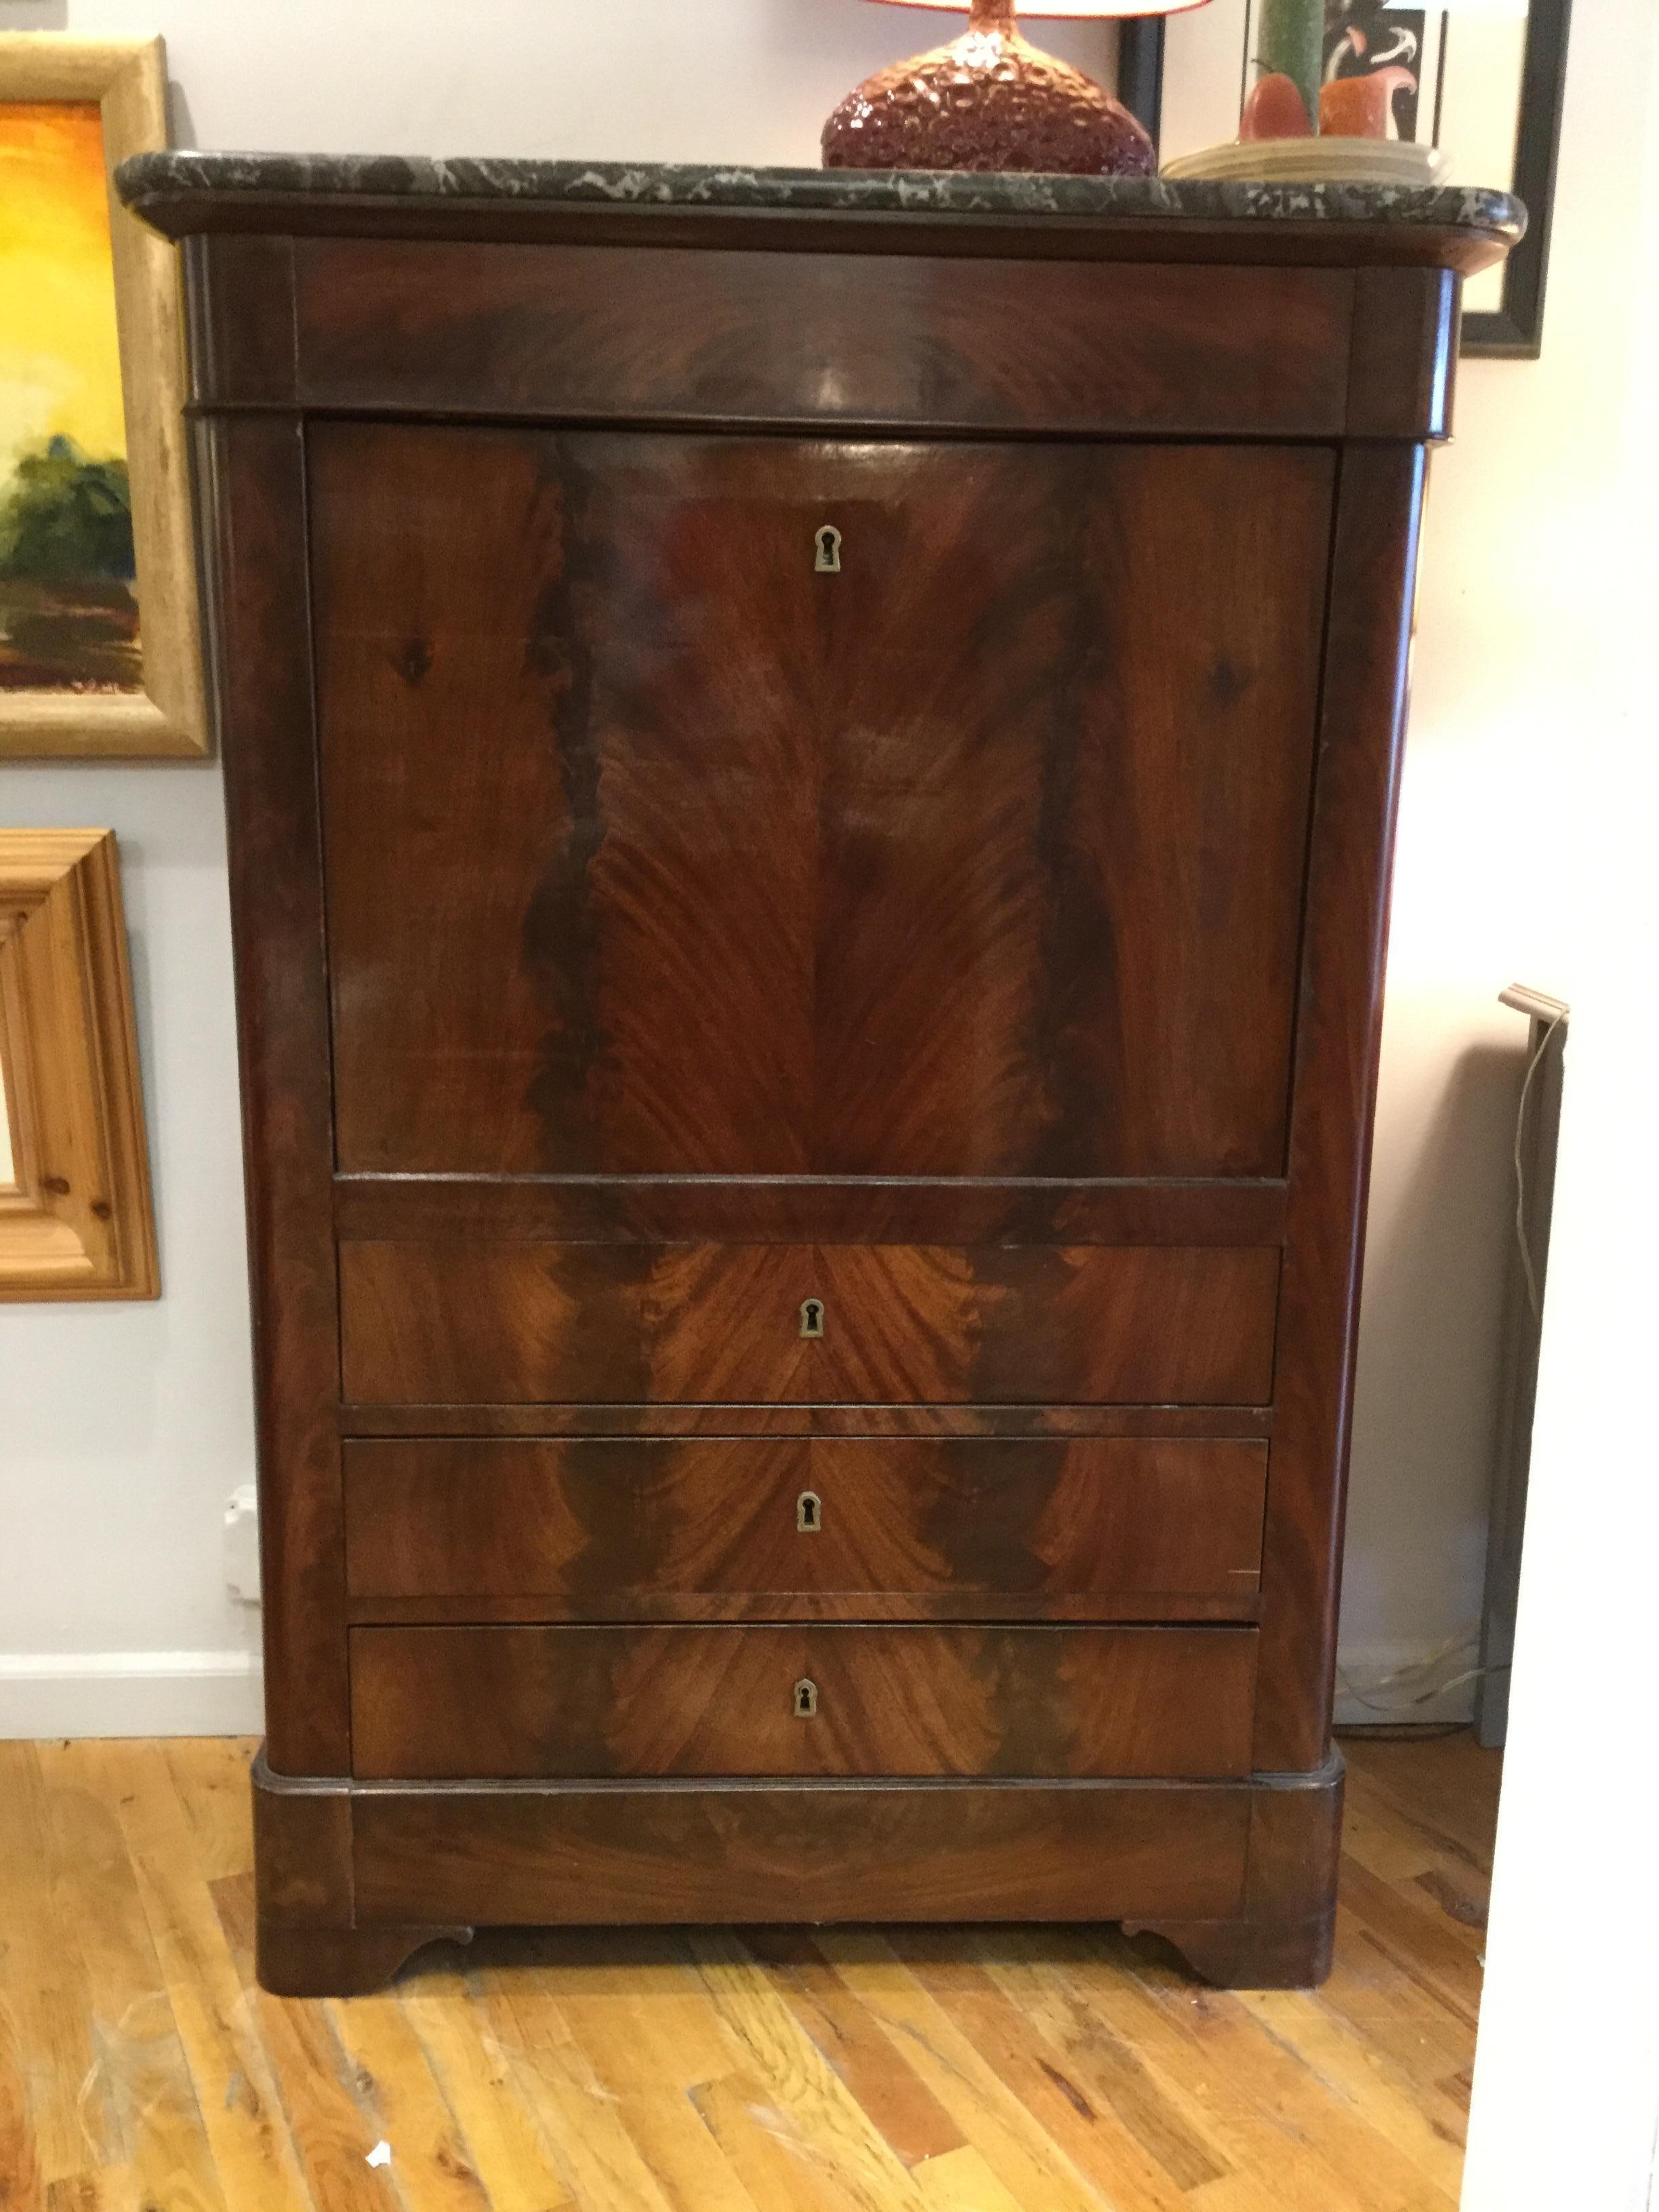 Handsome 19th century French flame mahogany secretary. With a gorgeous French-polished finish, this piece features three drawers and a drop-down writing area covered with dark green leather. Multiple cubby holes provide storage for papers and books.